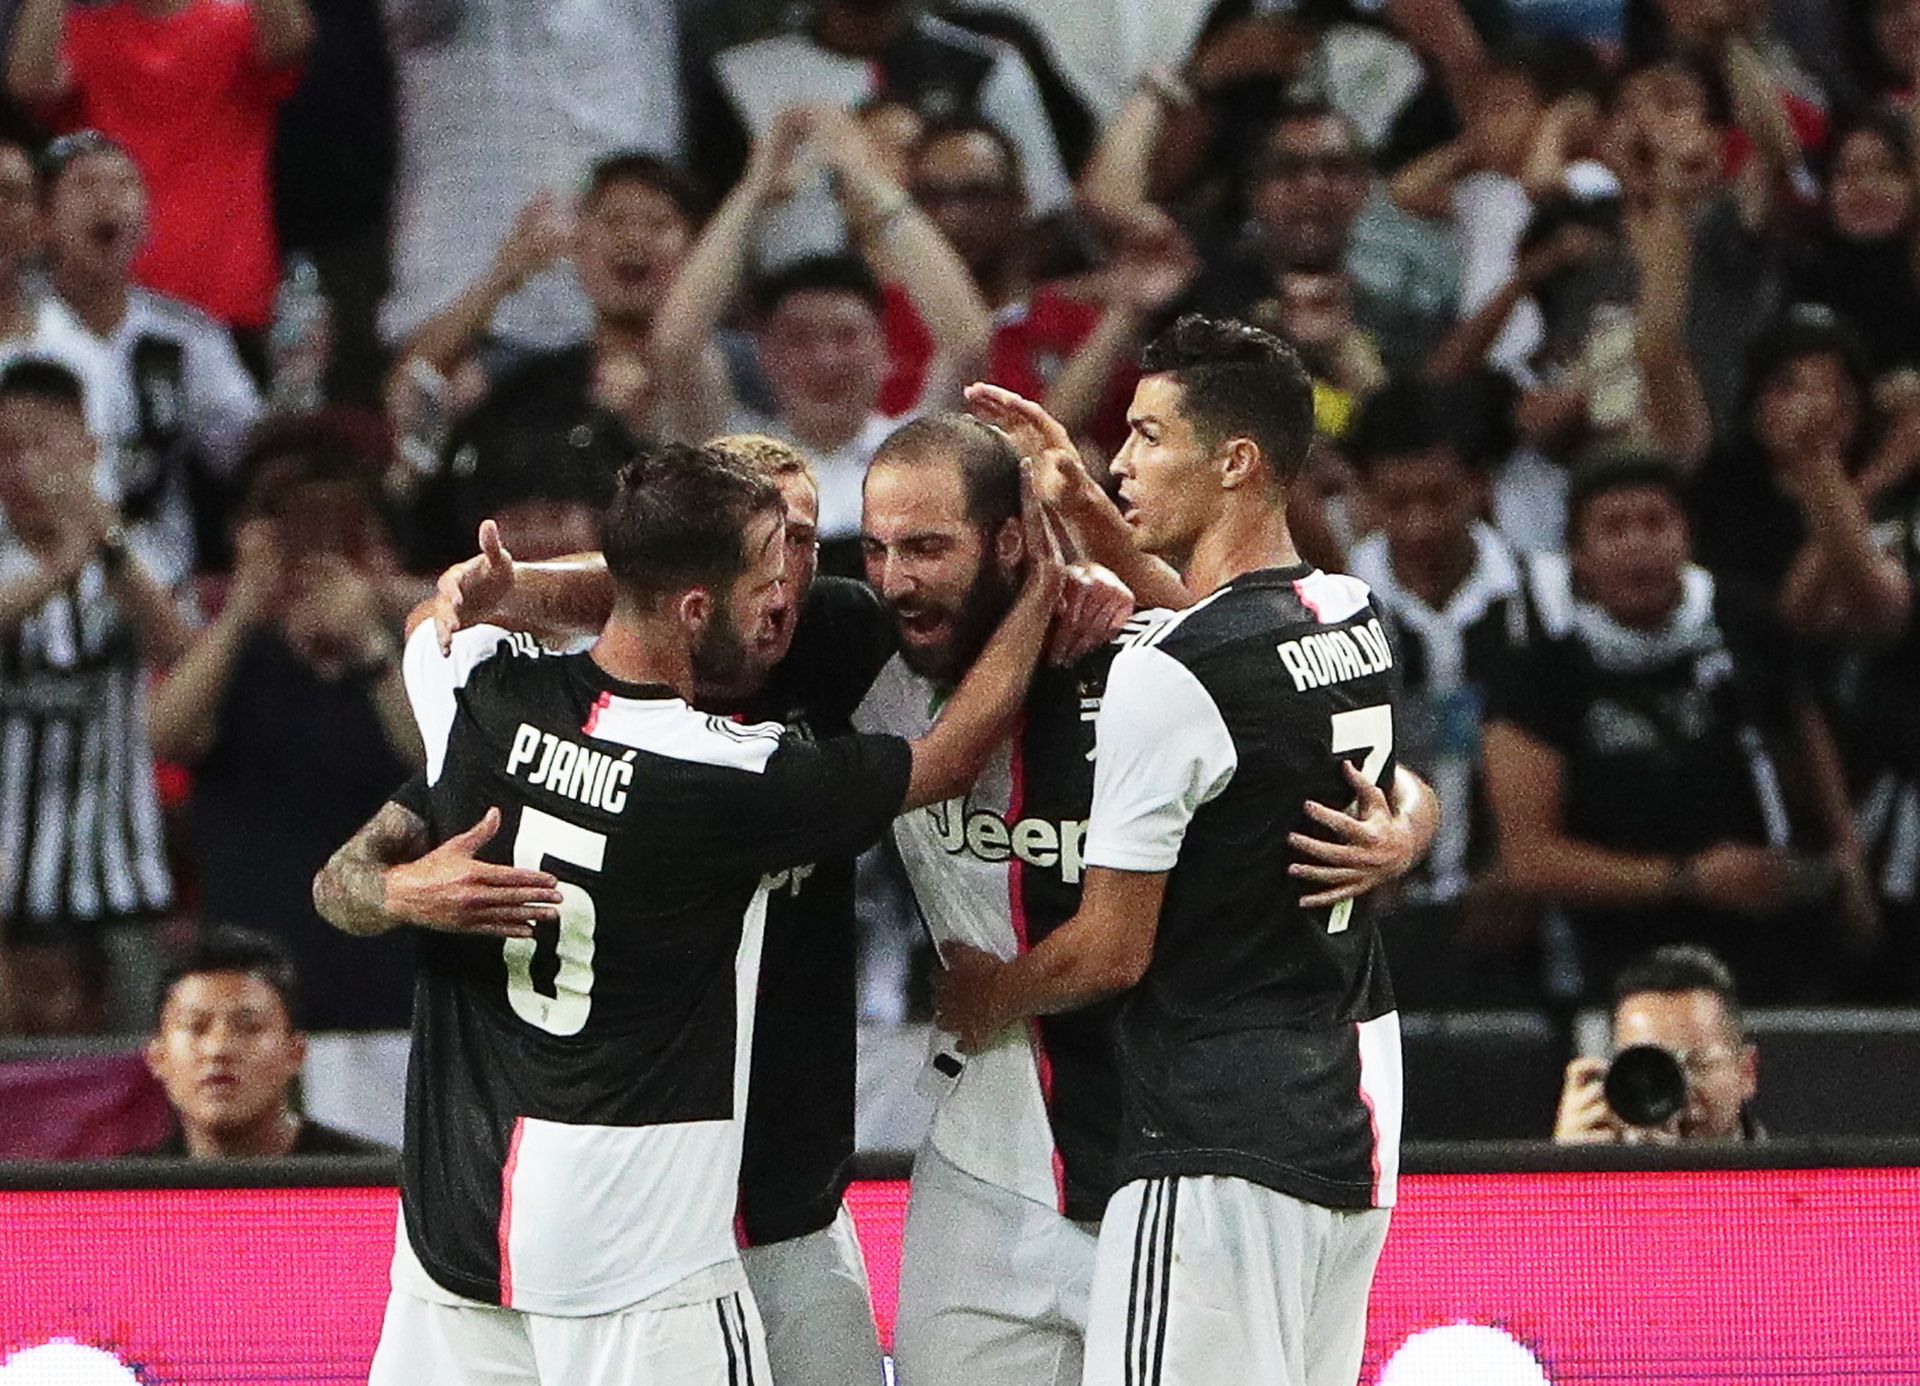 epa07731634 Juventus' Gonzalo Higuain (C) celebrates with his teammates Miralem Pjanic (L) and Cristiano Ronaldo (R) after scoring the 1-1 equalizer during the International Champions Cup (ICC) soccer match between Juventus FC and Tottenham Hotspur at the National Stadium in Singapore, 21 July 2019.  EPA/WALLACE WOON